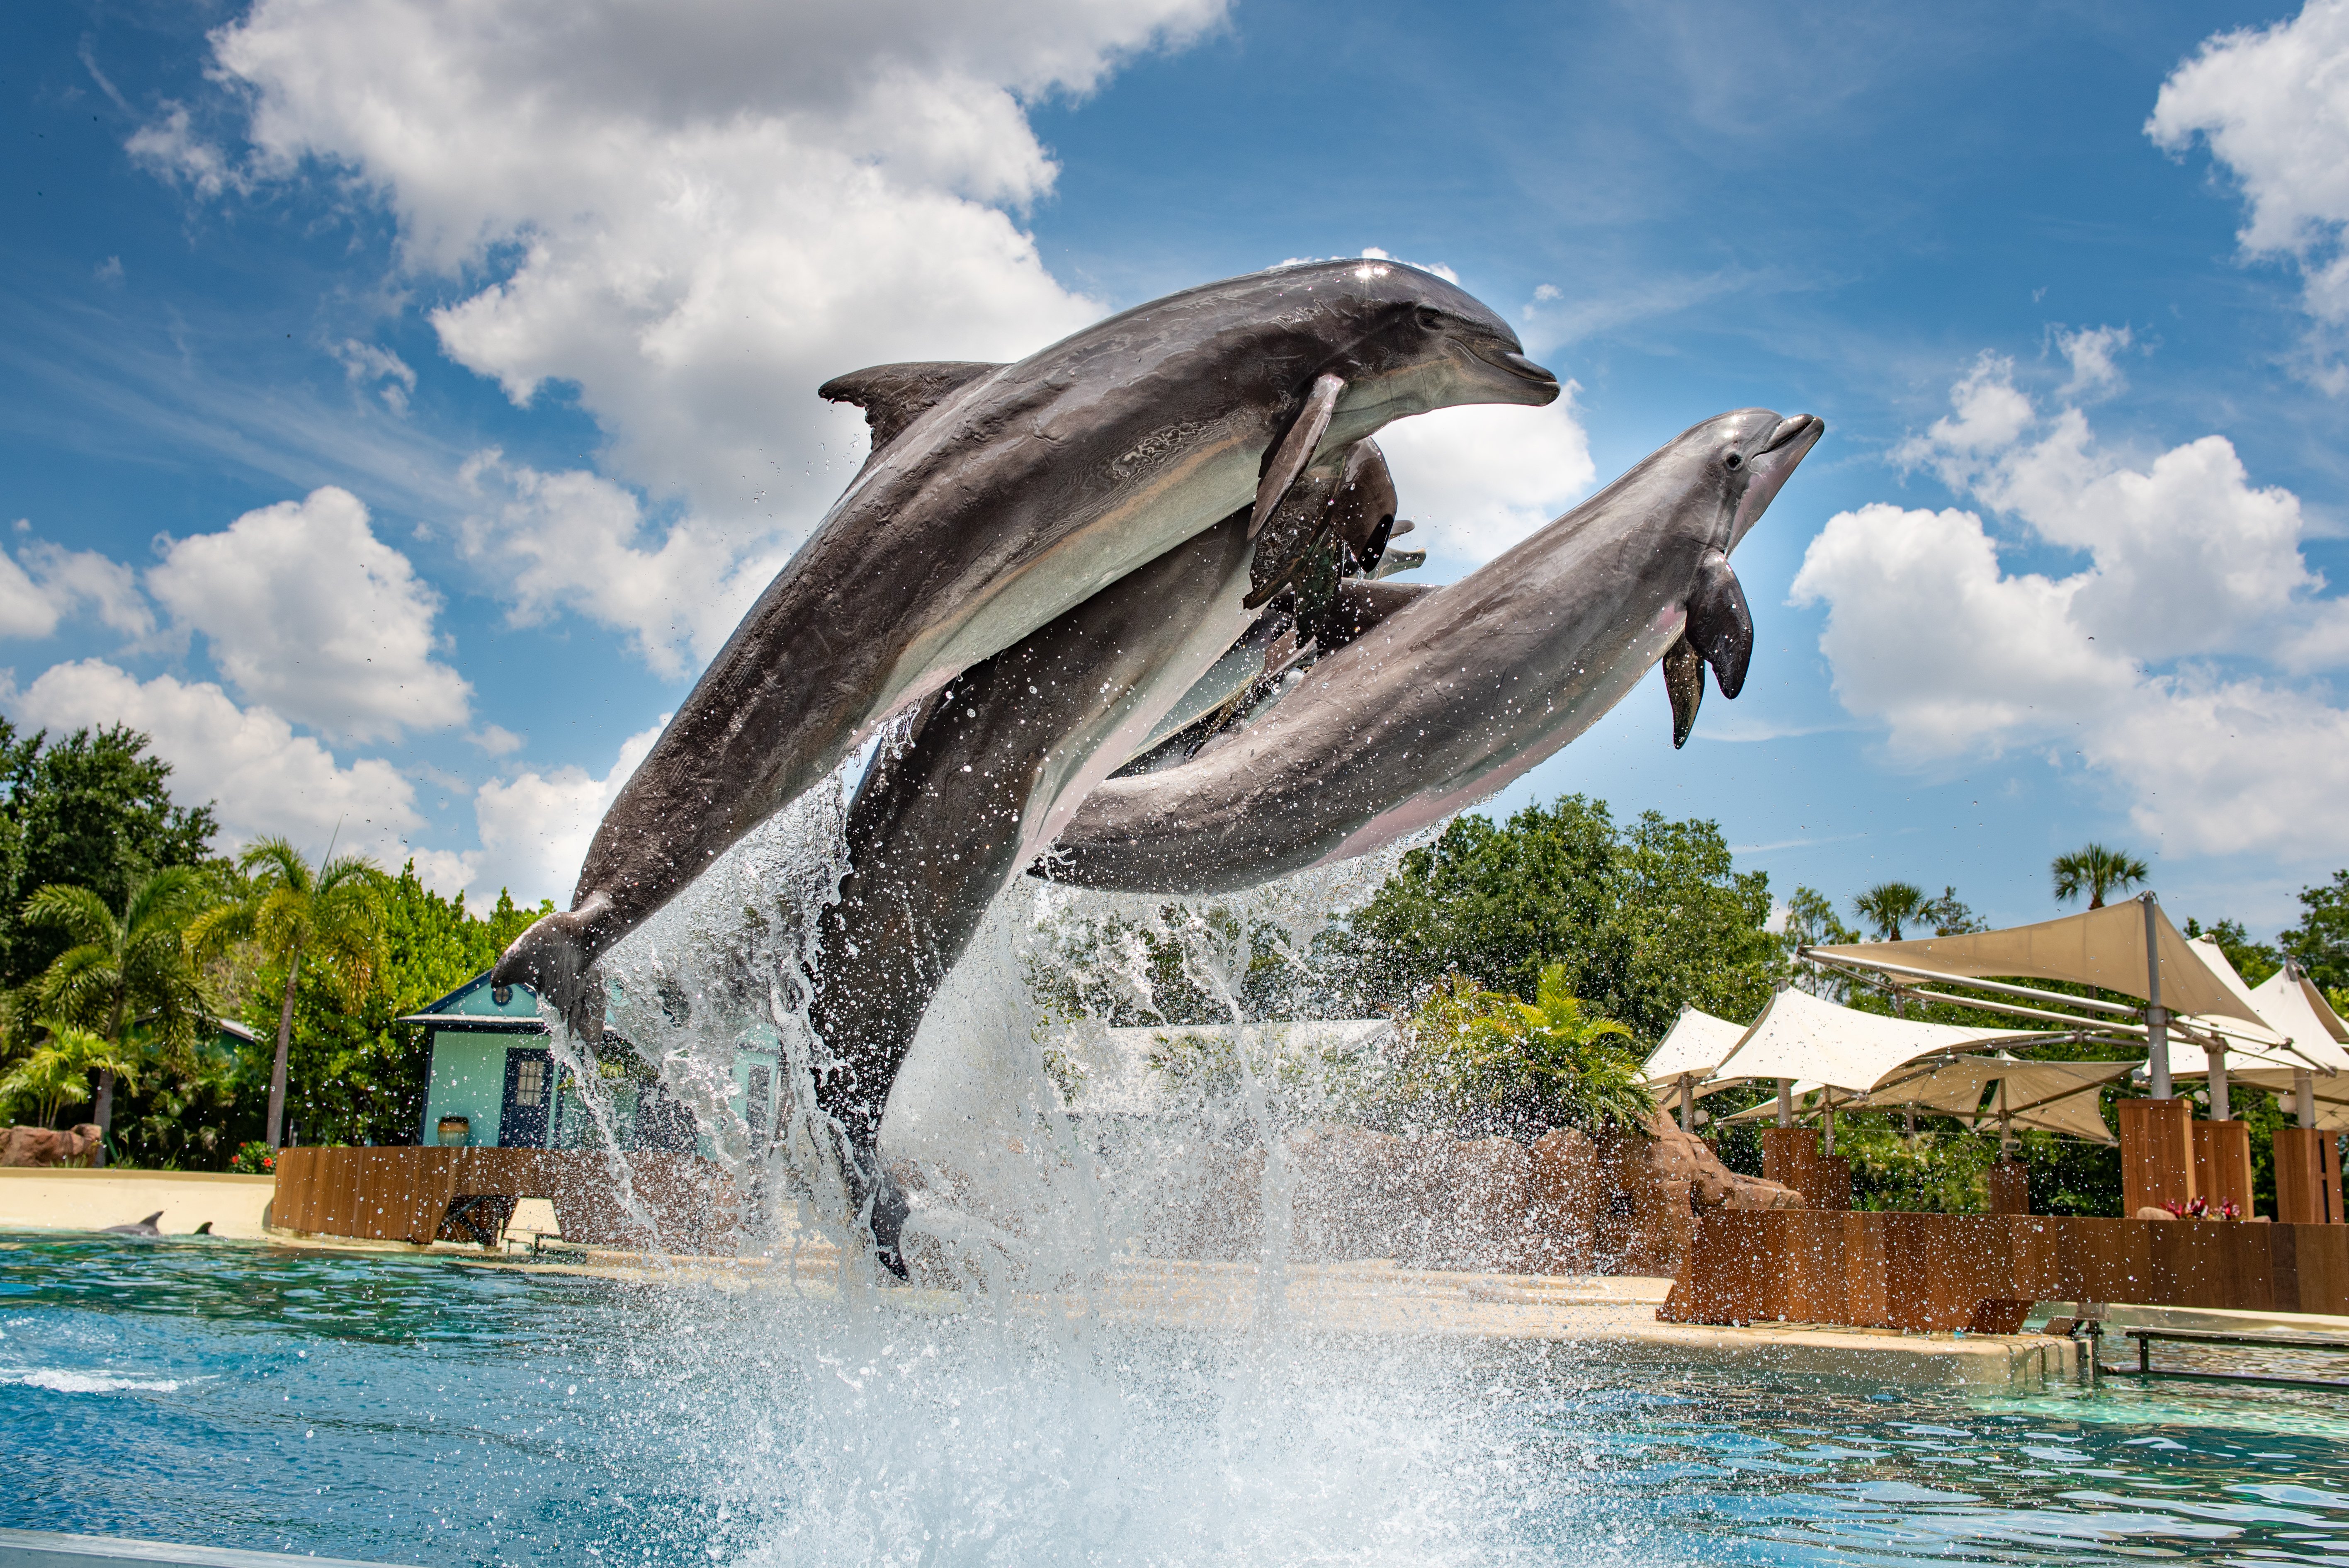 Dolphins Leaping